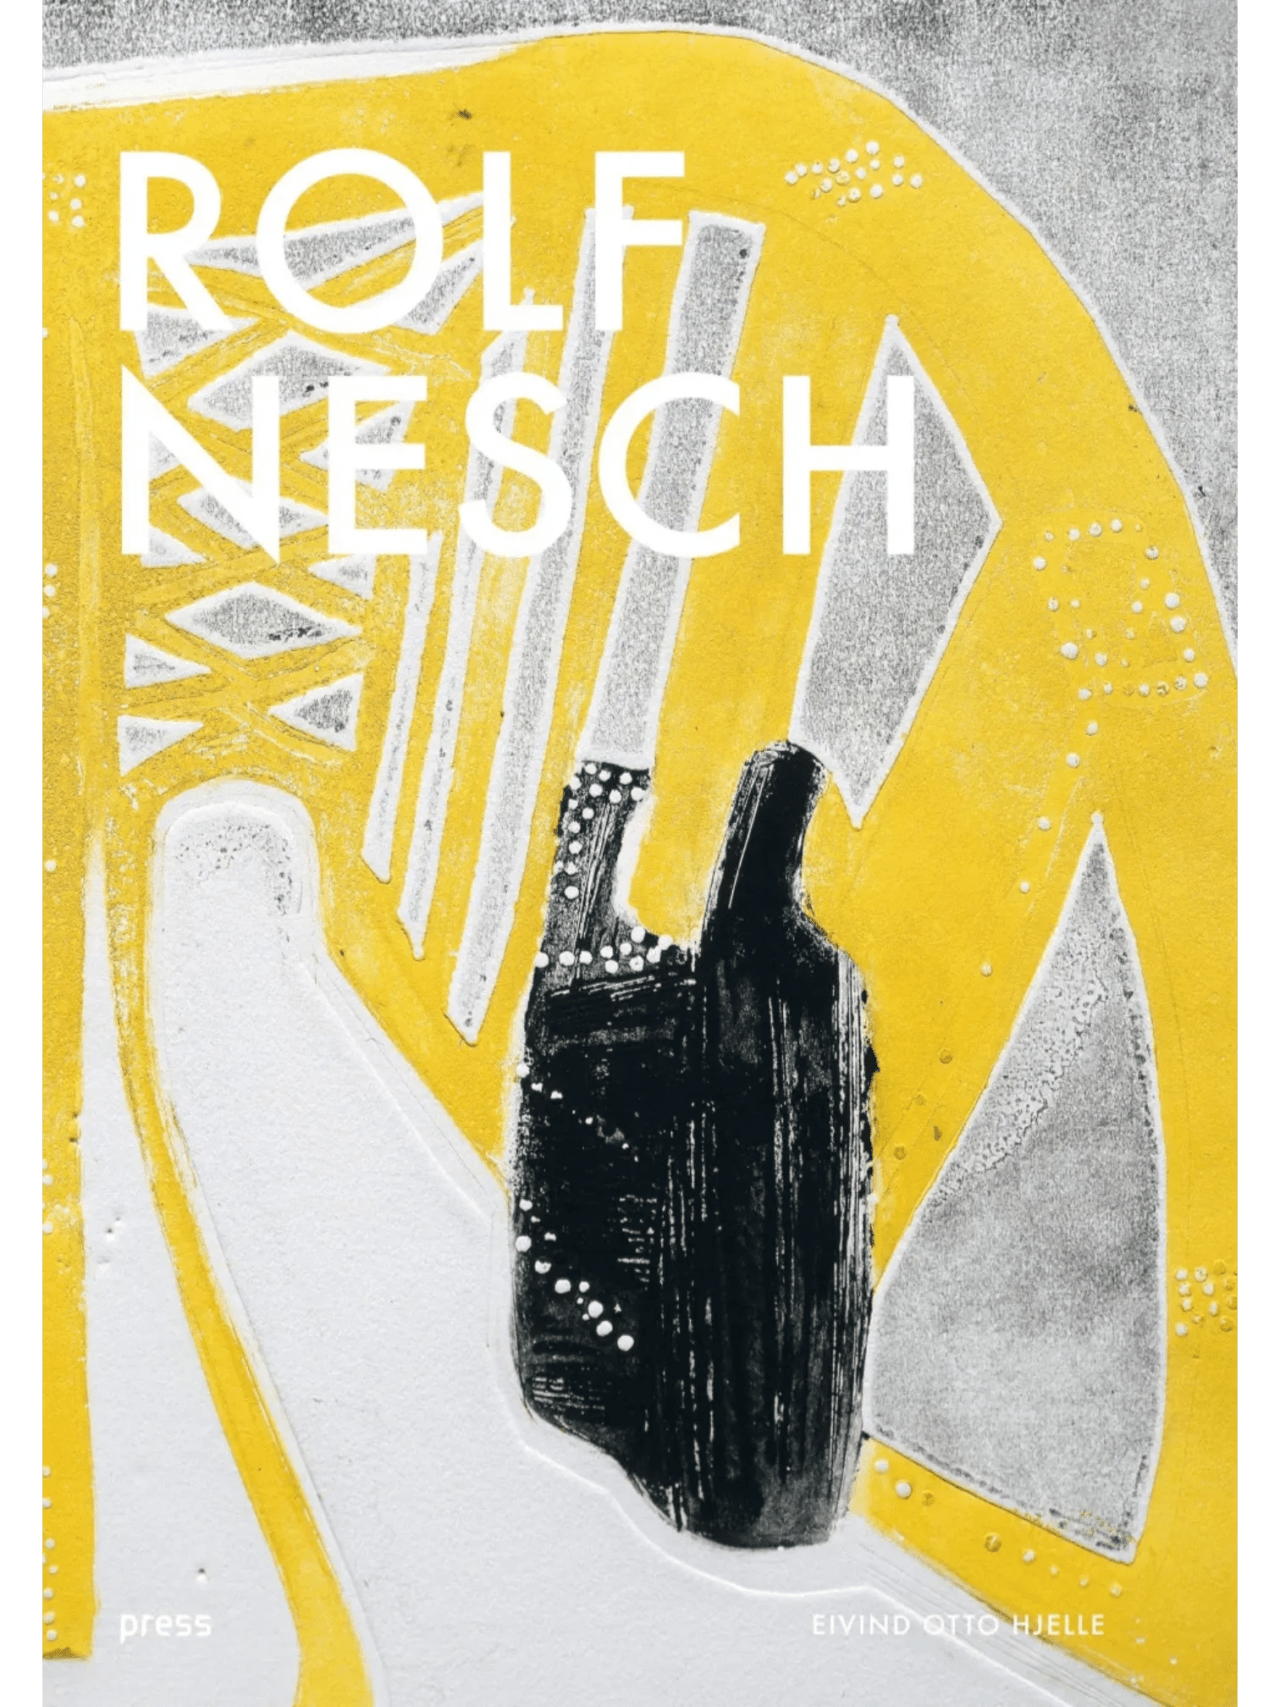 Yellow and grey book cover with artwork